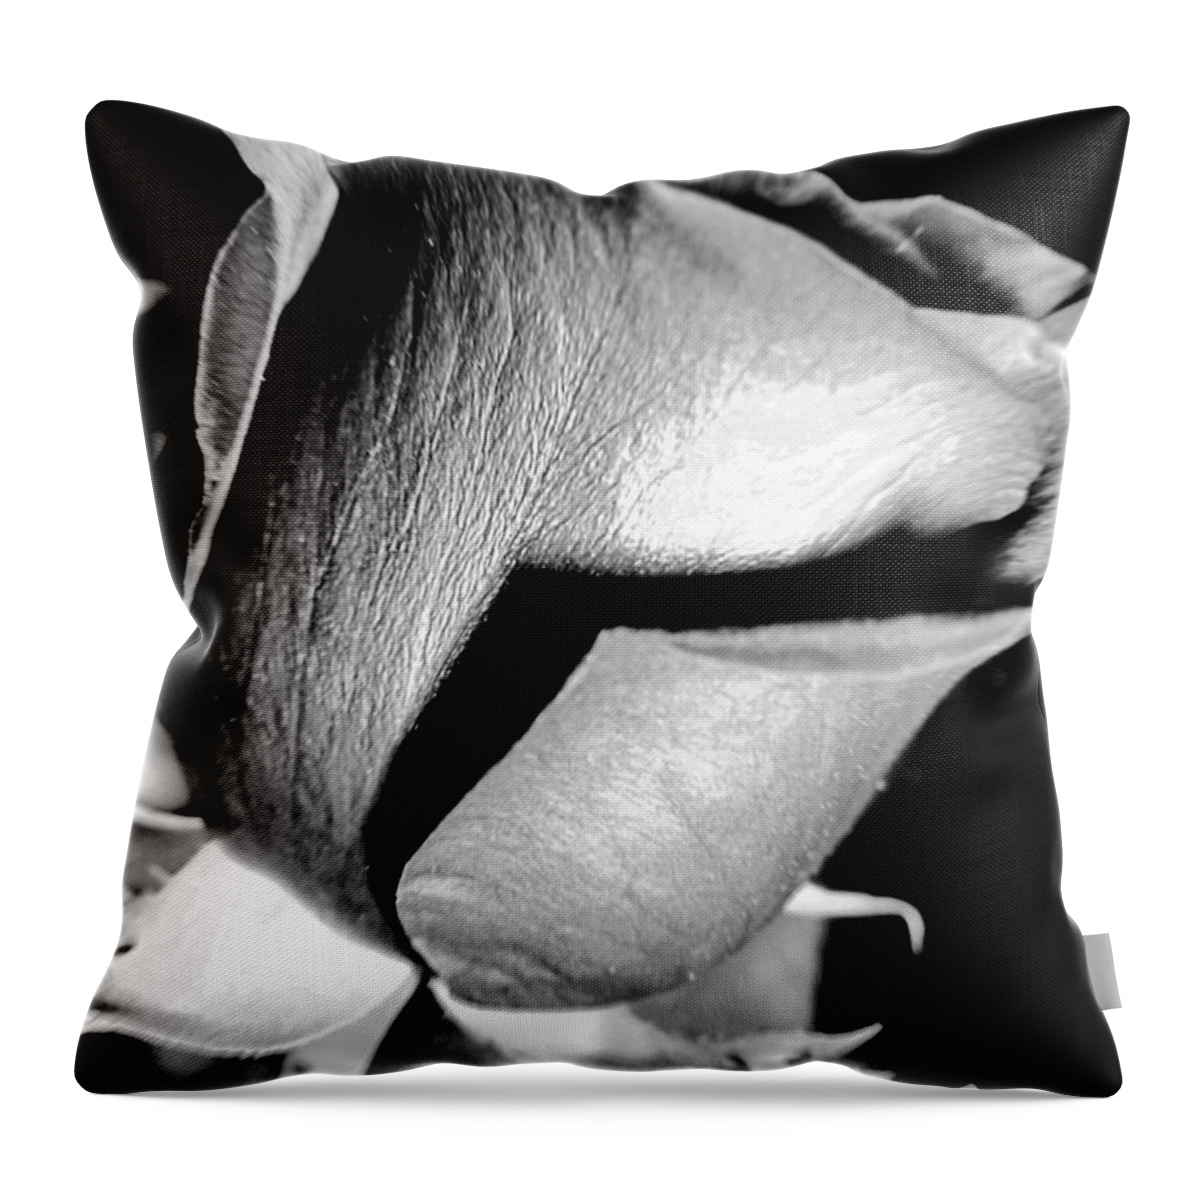 Shade Throw Pillow featuring the photograph Shades Of Rose by Nina Ficur Feenan